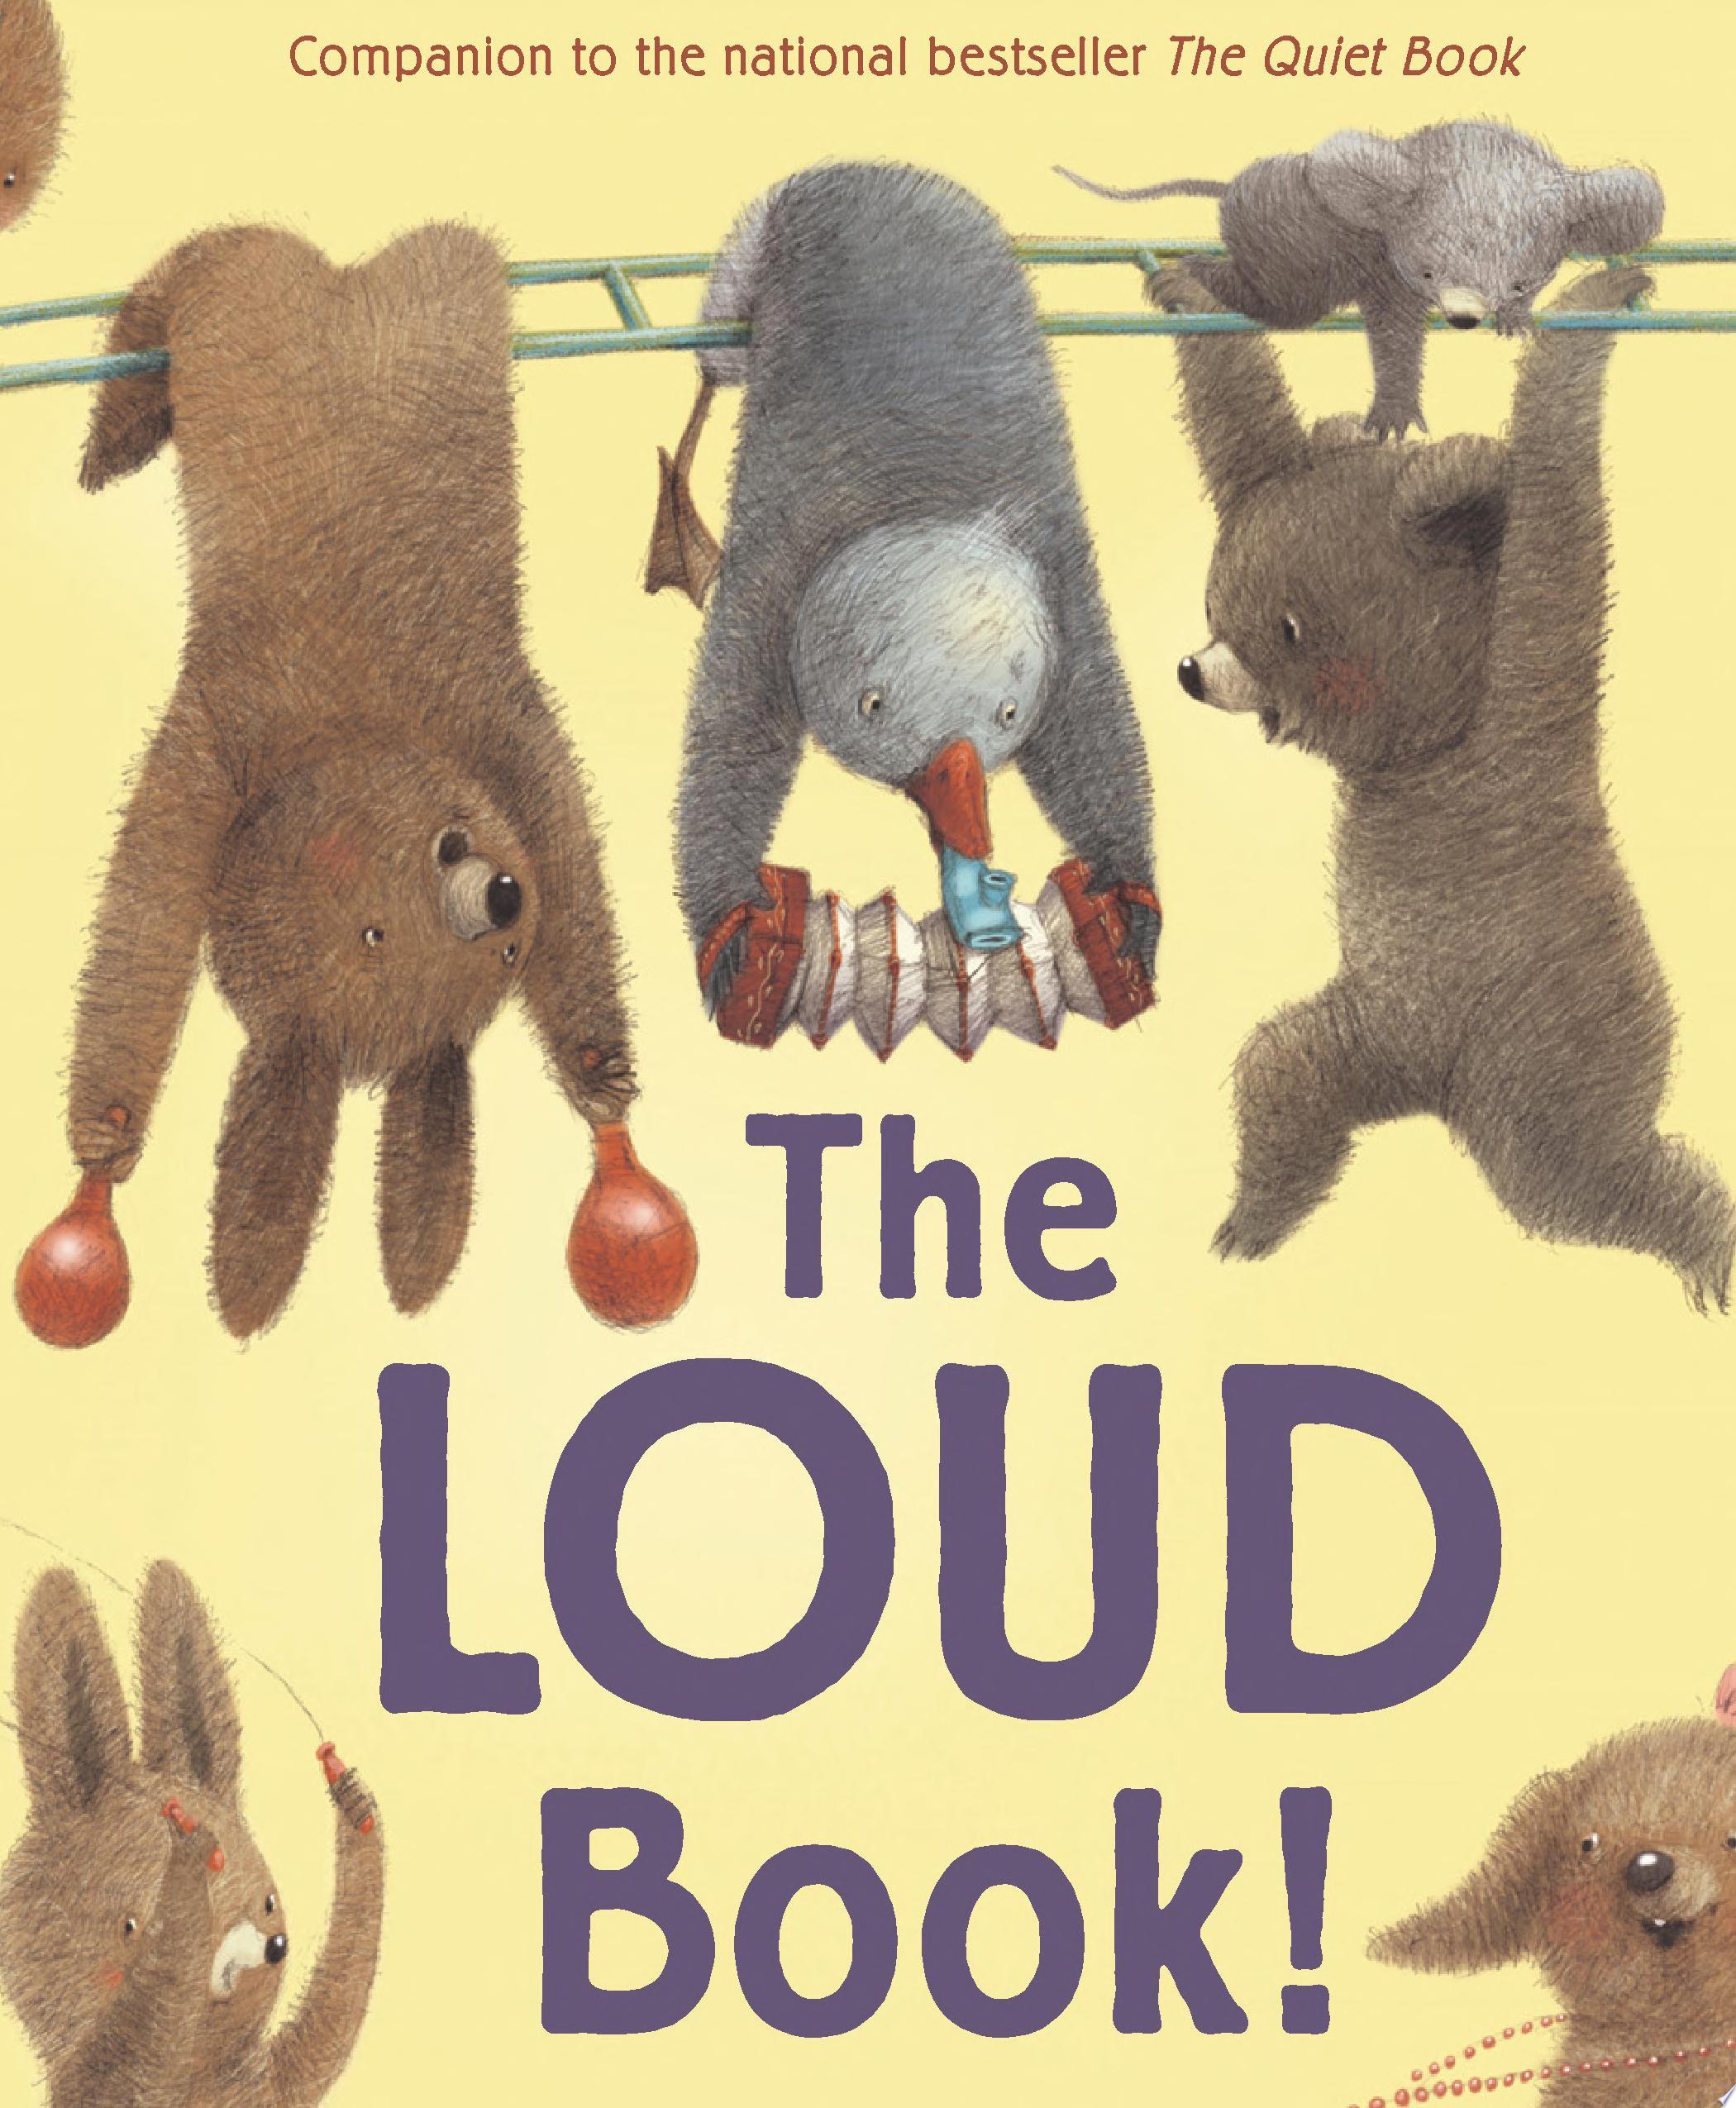 Image for "The Loud Book!"